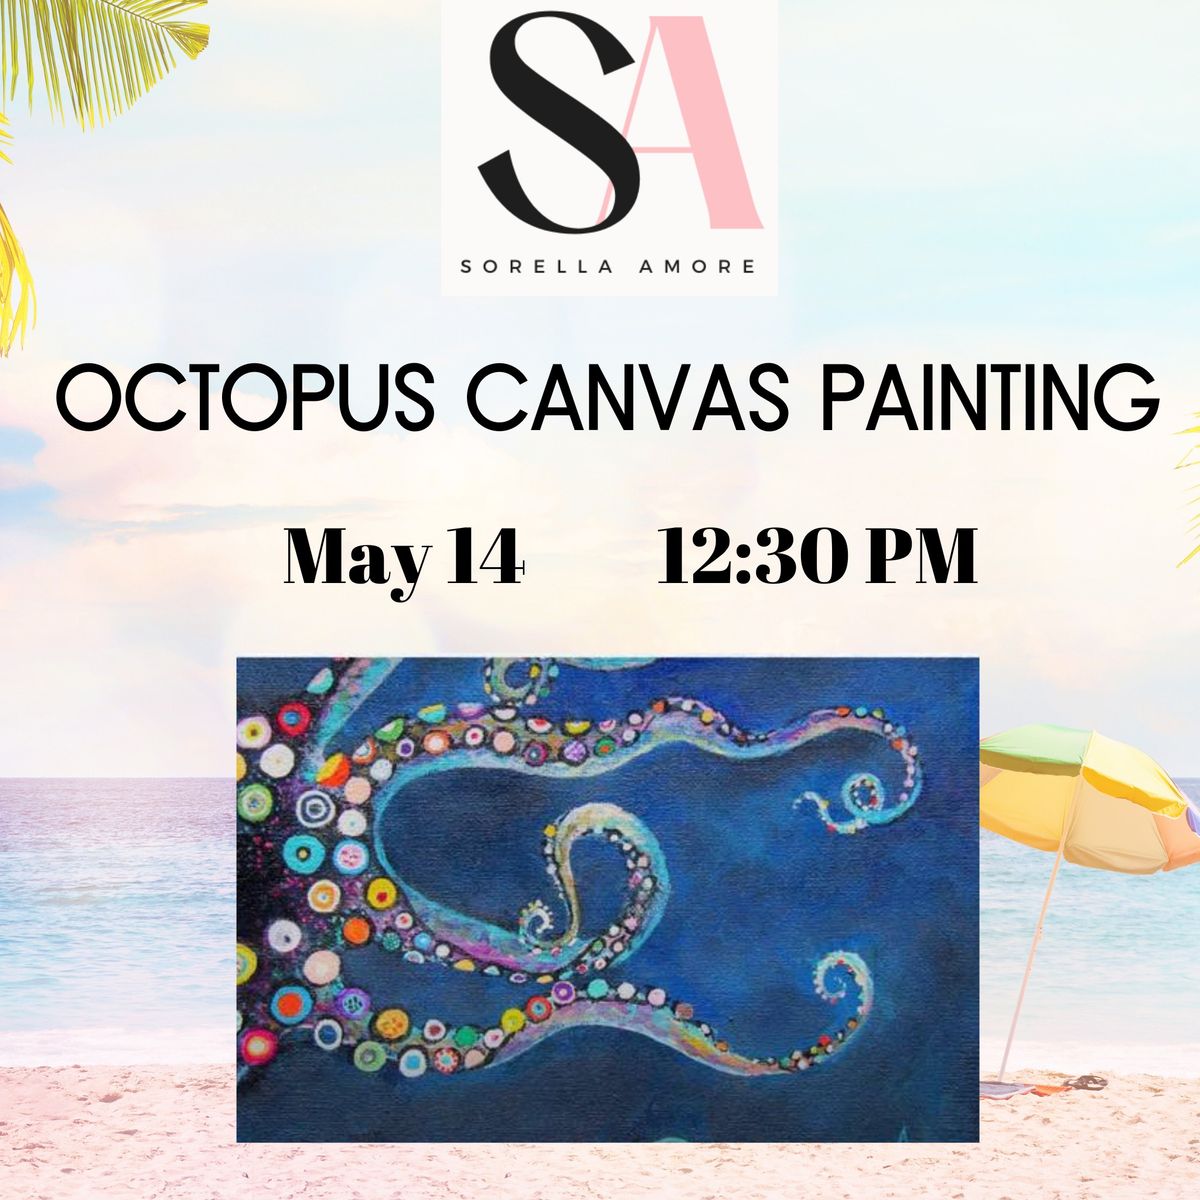 Octopus Canvas Painting